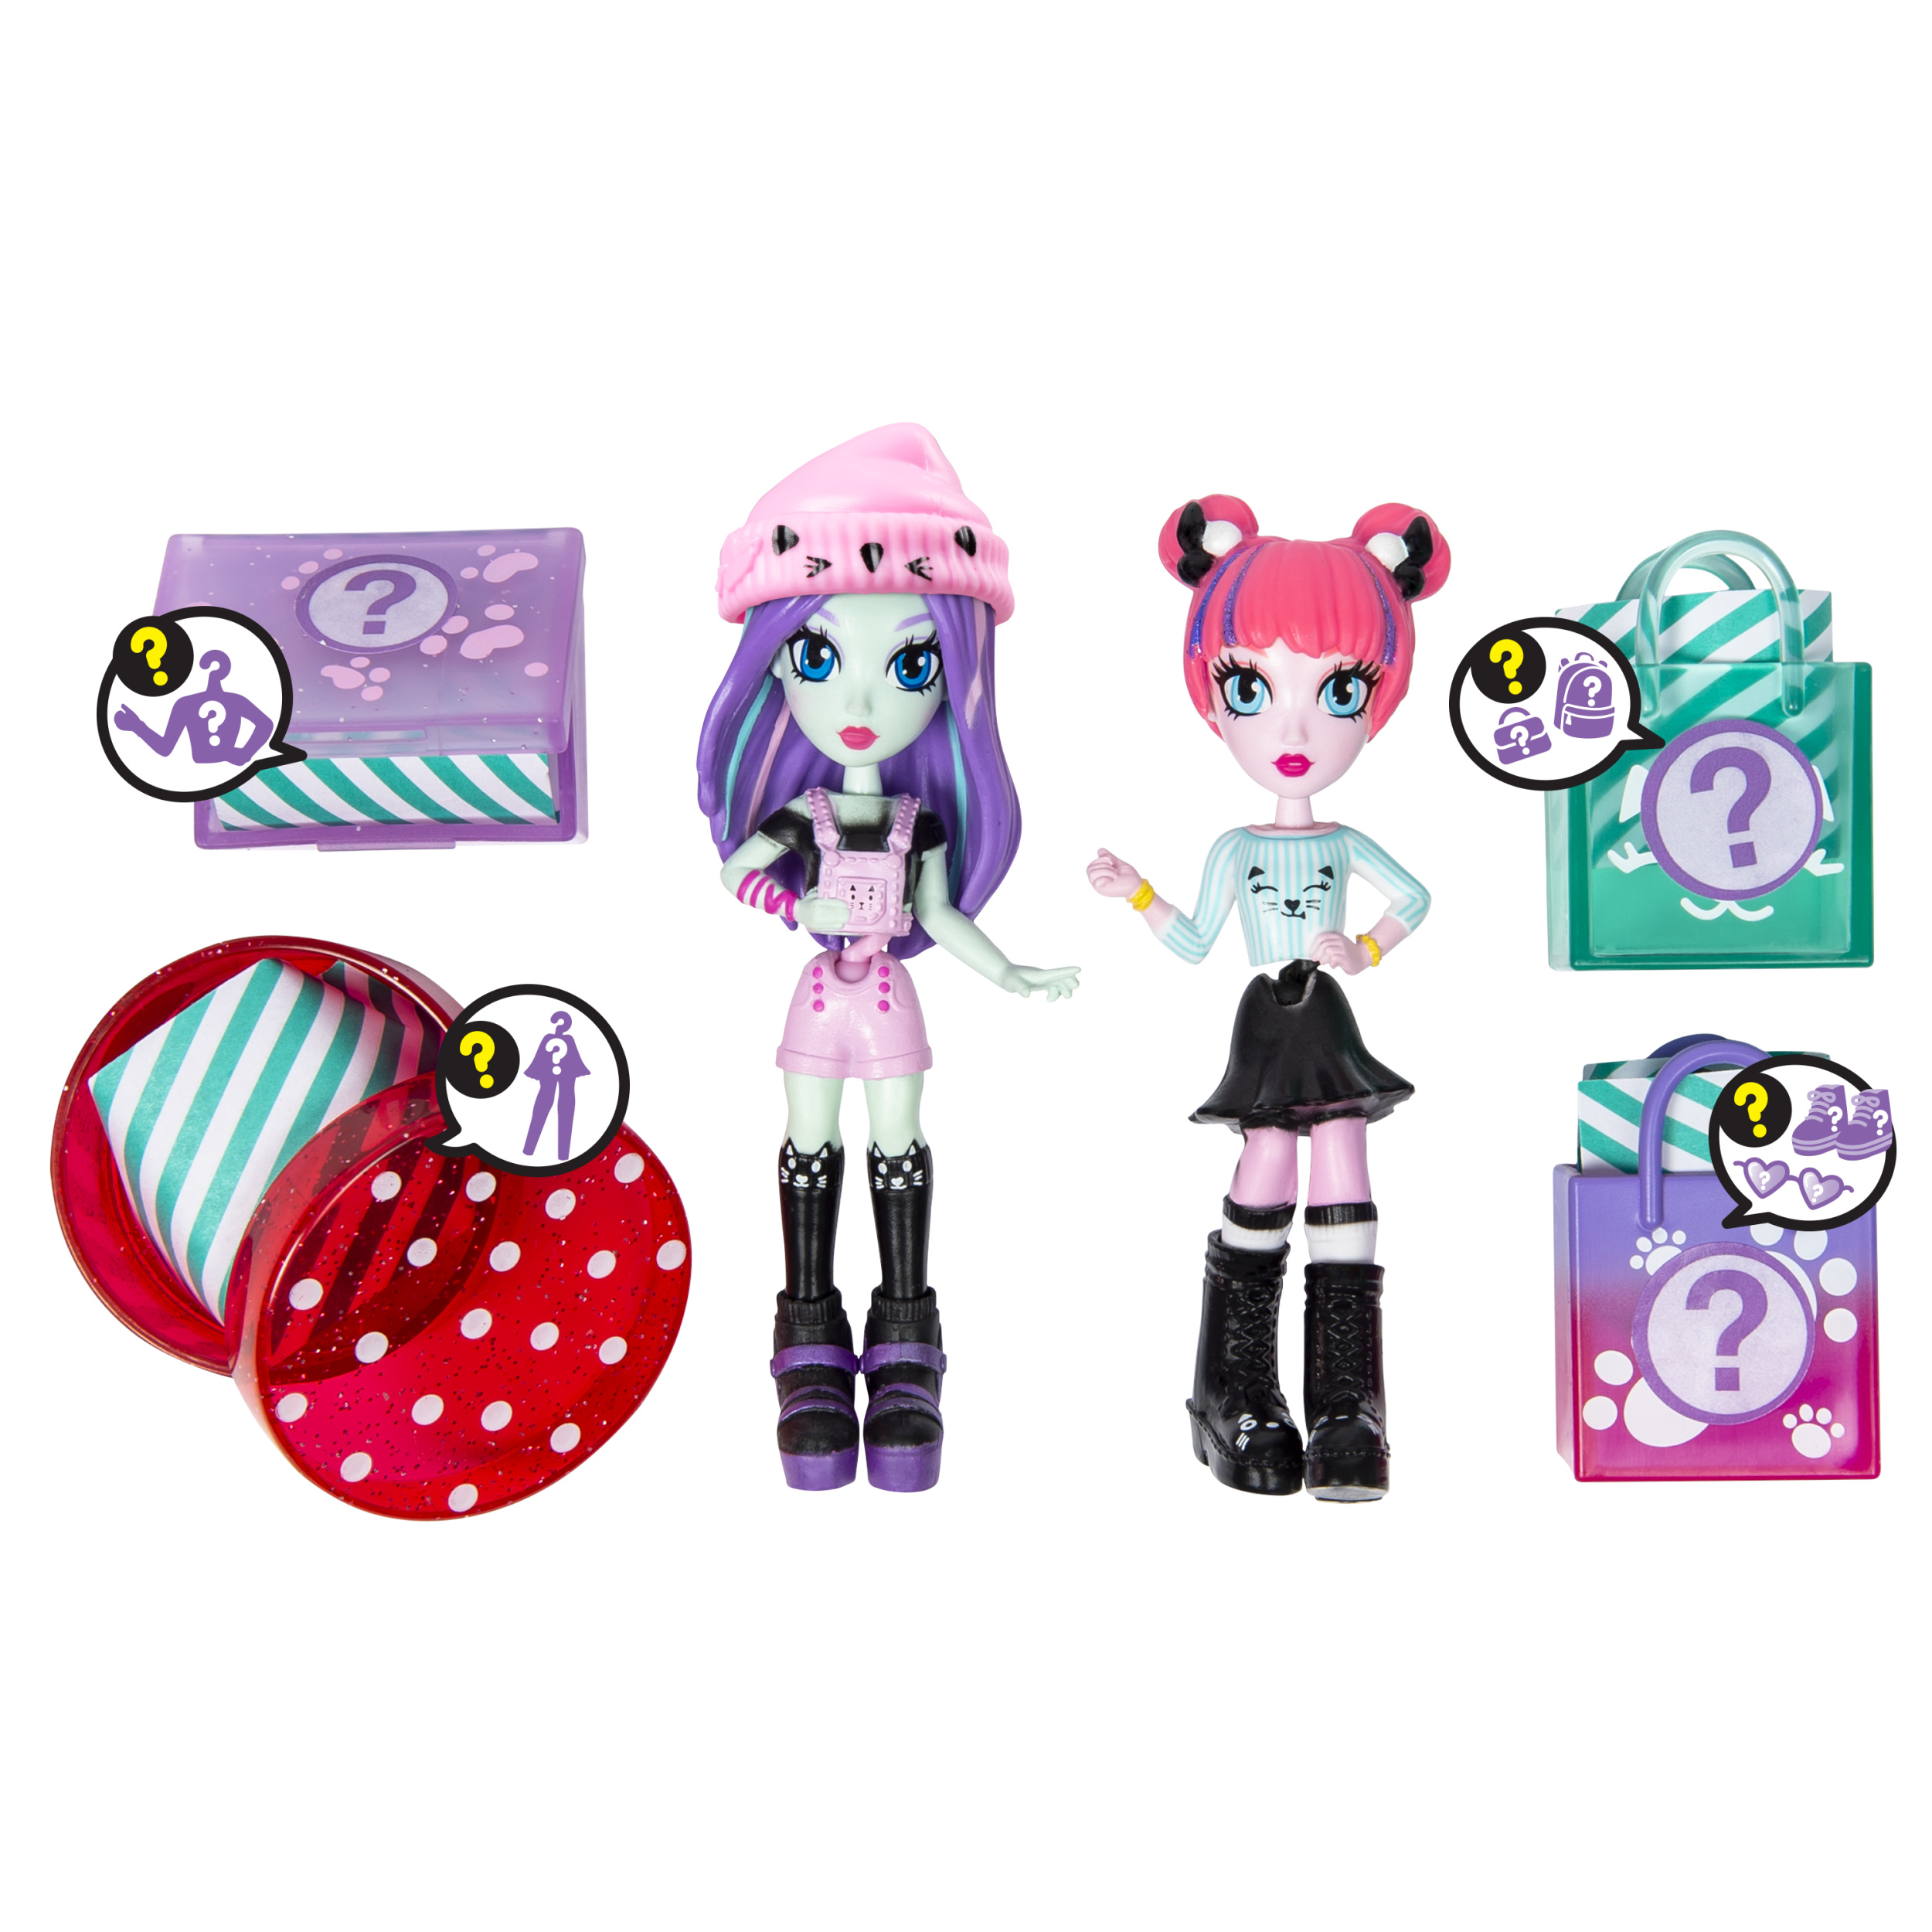 Off The Hook Style BFFs Brooklyn & Alexis Fashion Doll Playset, 6 Pieces Included - image 5 of 8